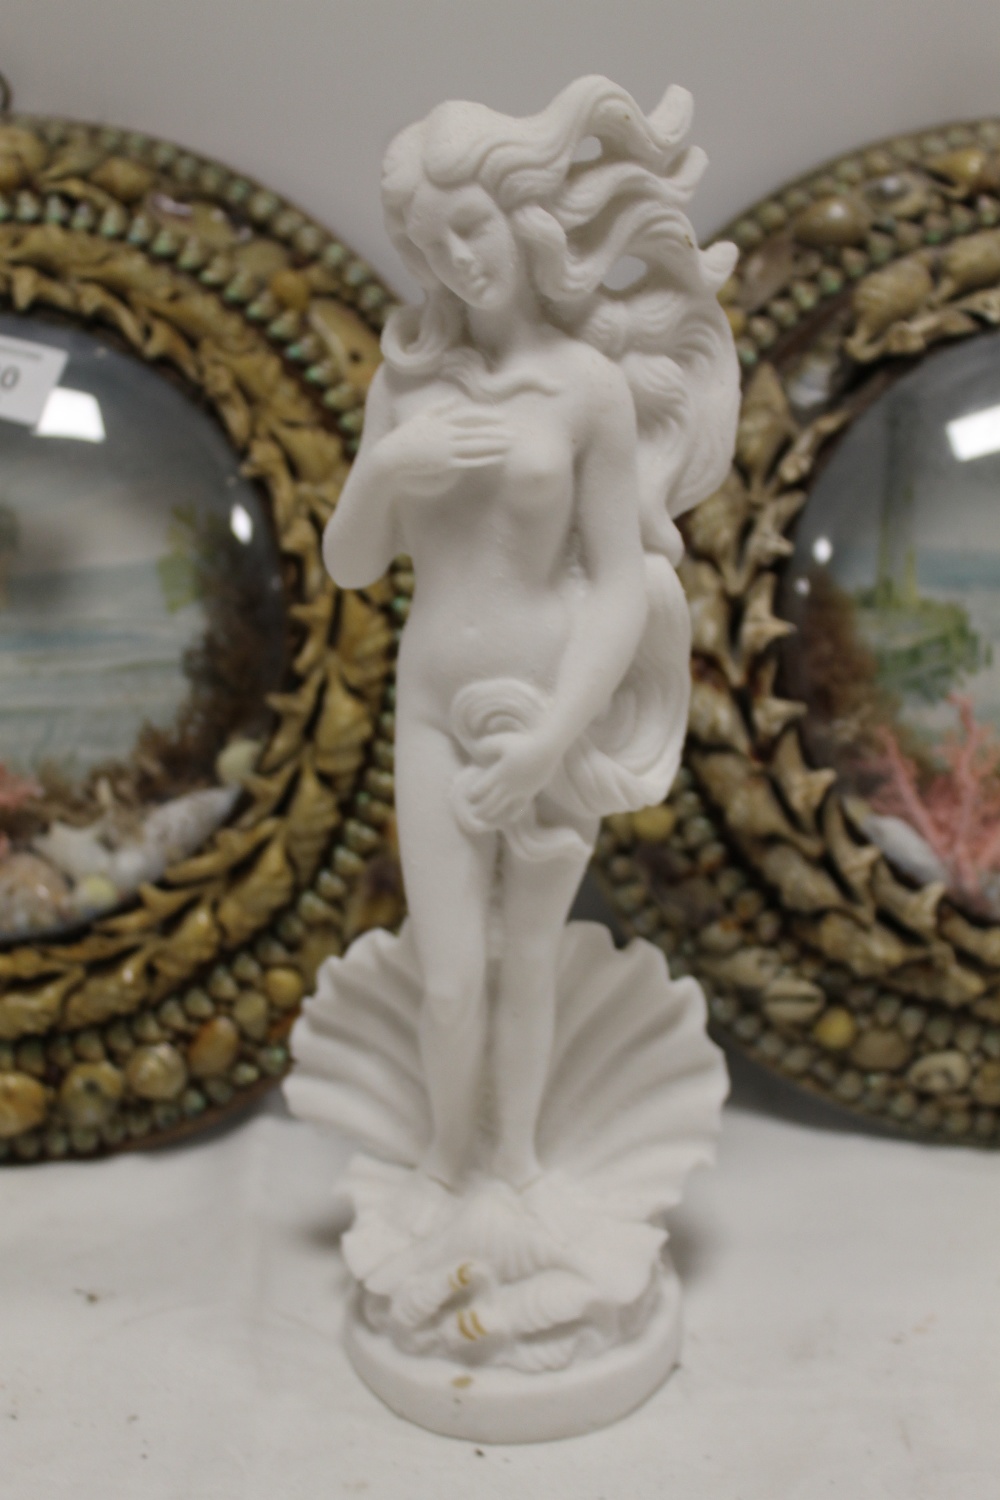 TWO SEA SHELL FRAMED DIORAMAS TOGETHER WITH A CORAL FIGURE OF A LADY - Image 4 of 4